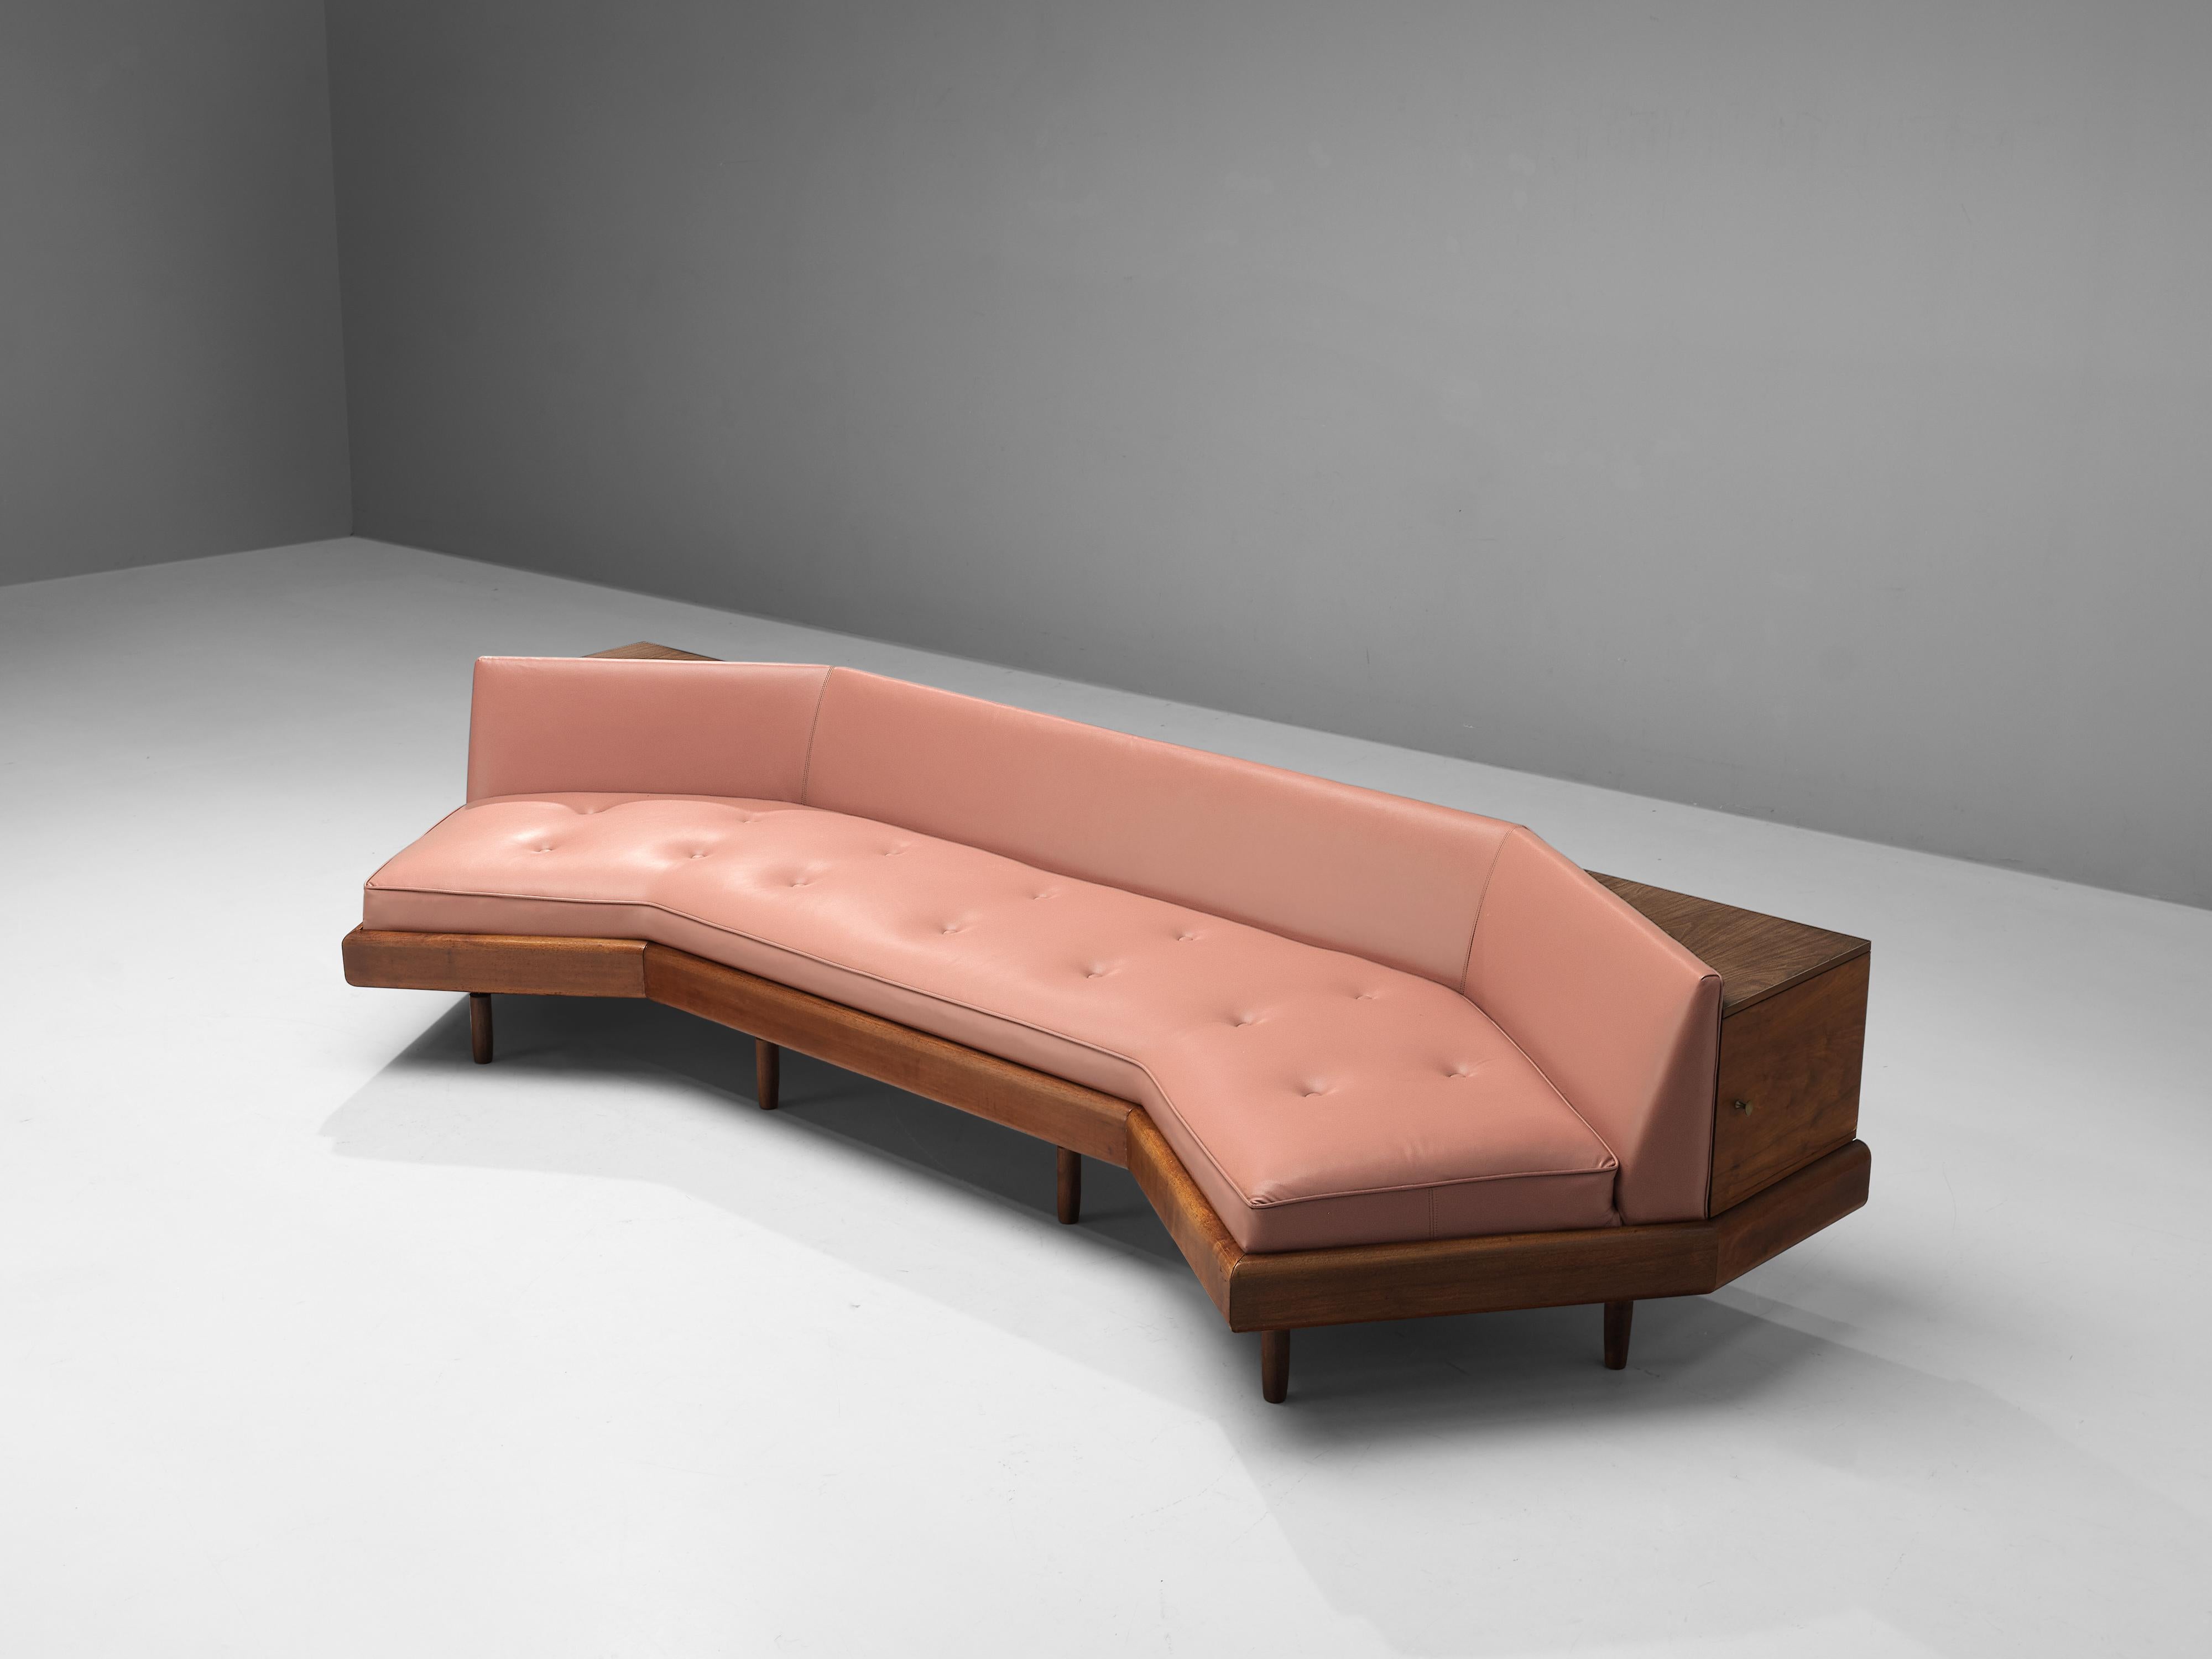 Adrian Pearsall, sofa, walnut, leatherette, United States, 1960s

Beautiful sofa created by the American designer Adrien Pearsall. The sofa has a unique shape with sharp and geometric lines that create an almost monumental look. The American walnut